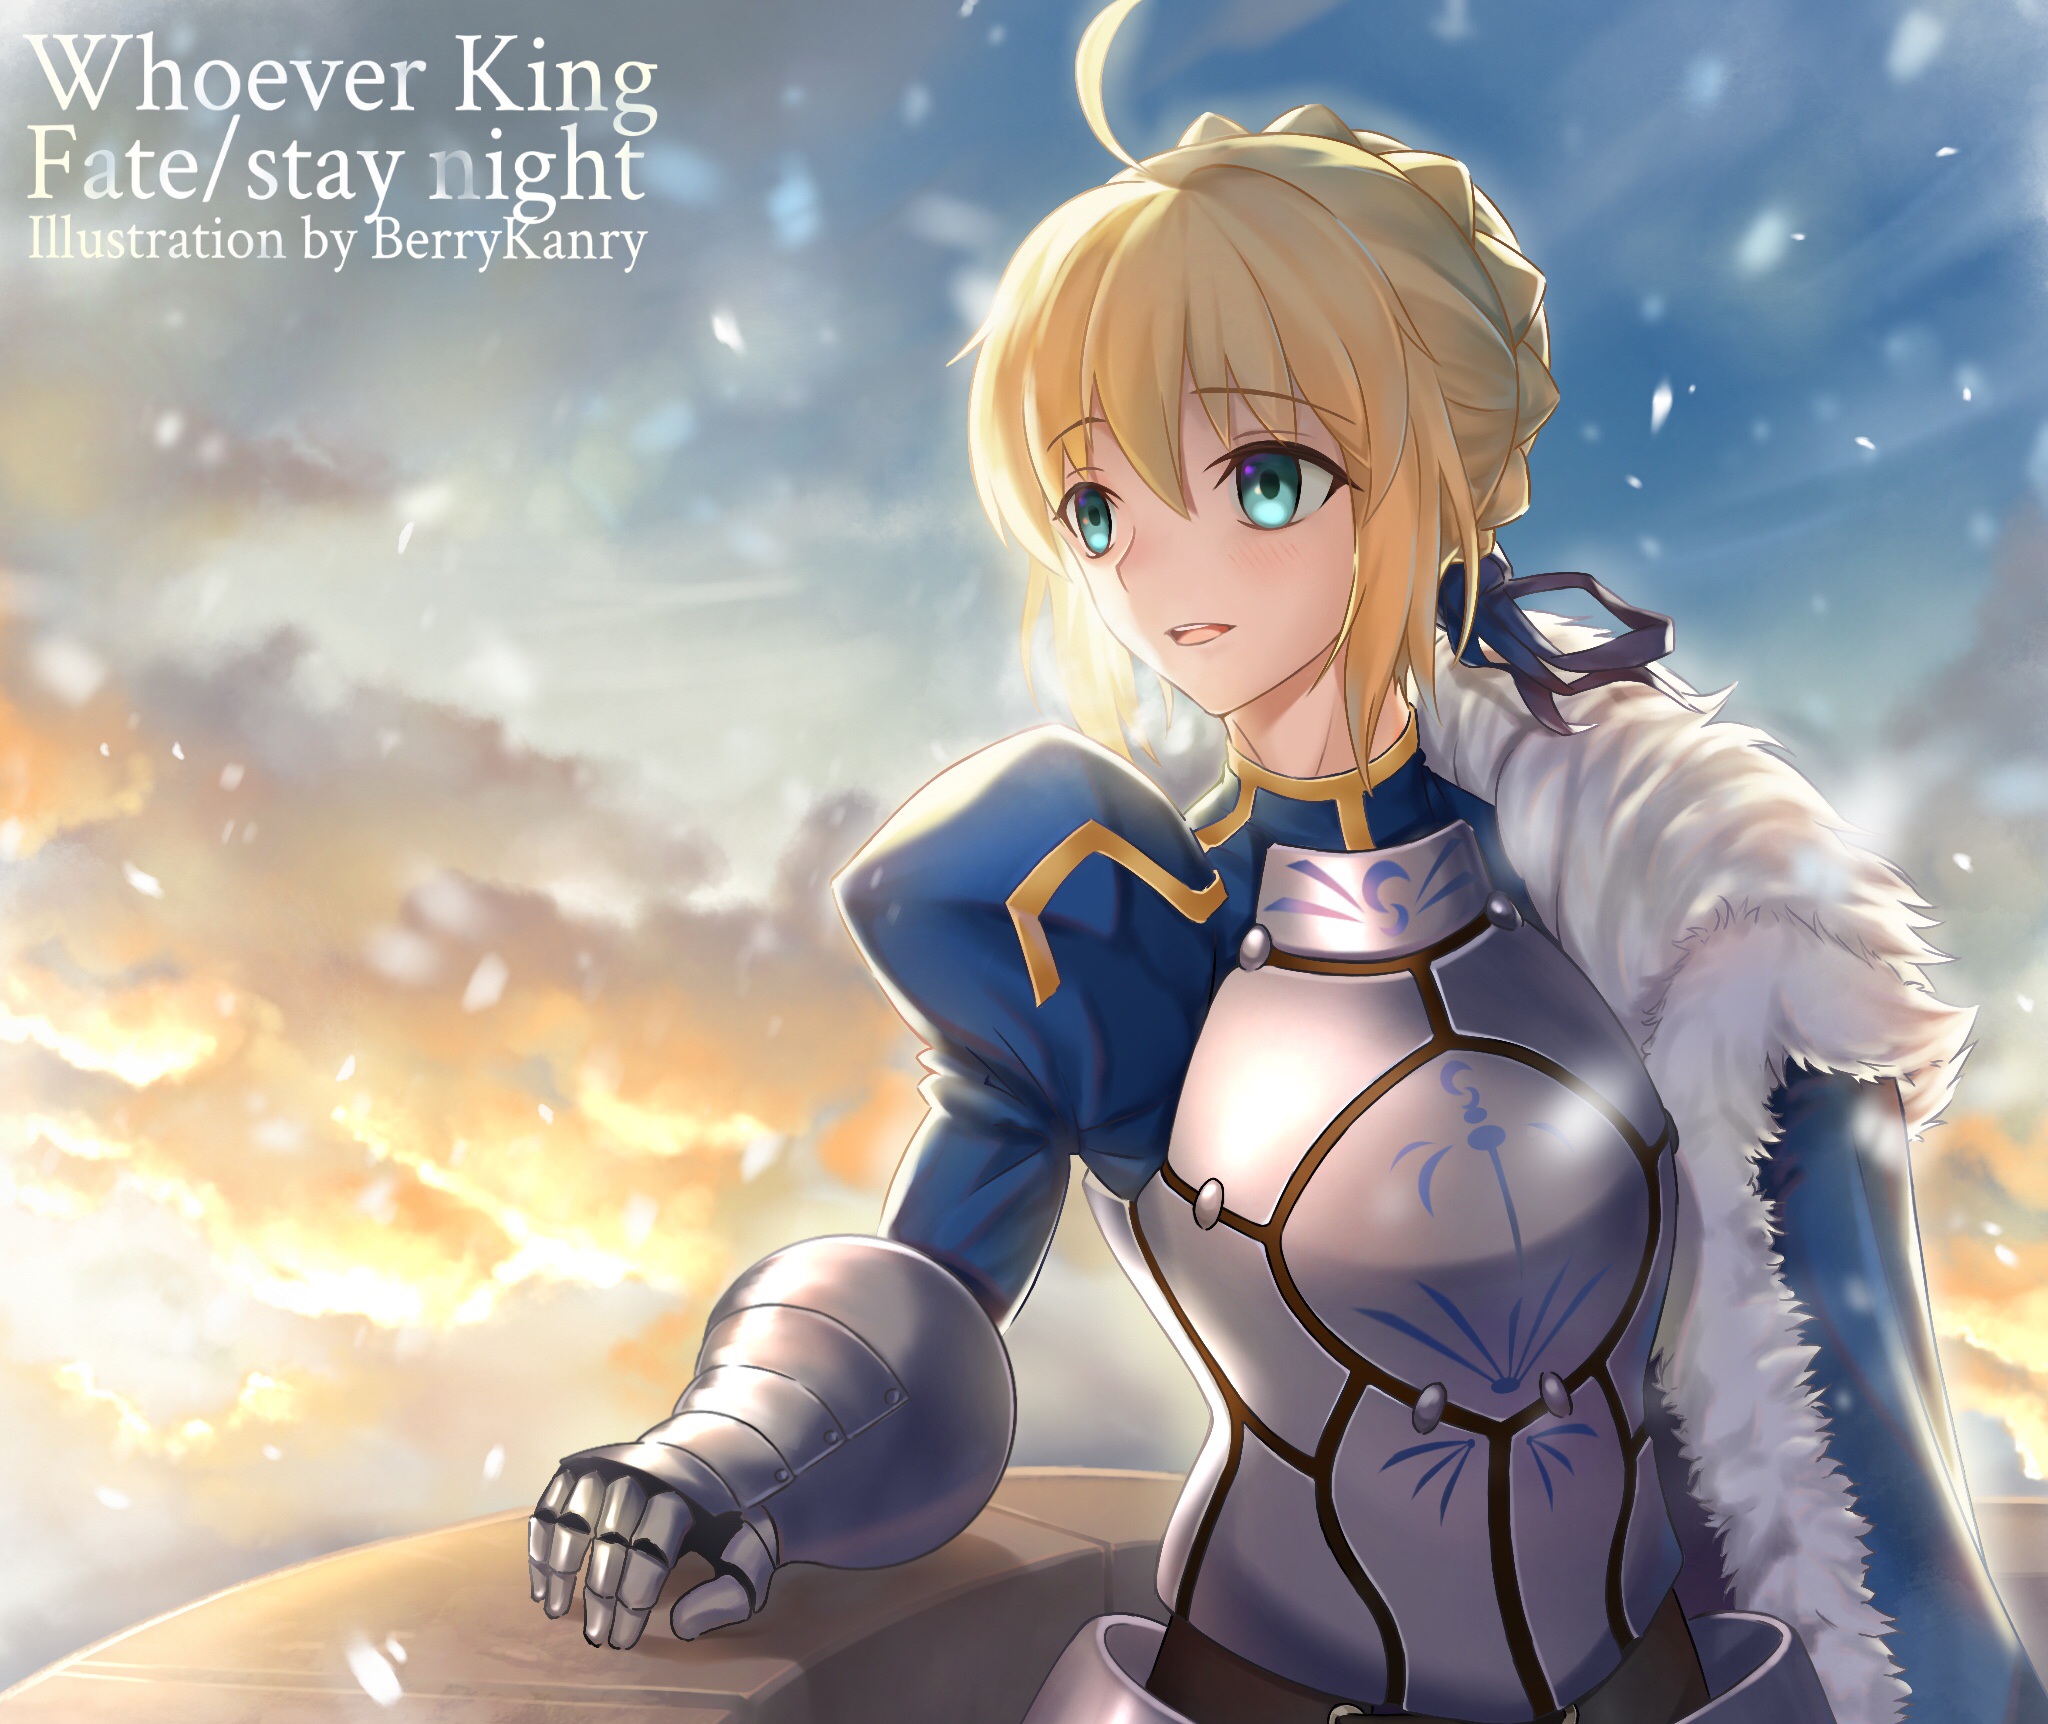 Anime Fate/Stay Night HD Wallpaper by berrykanry